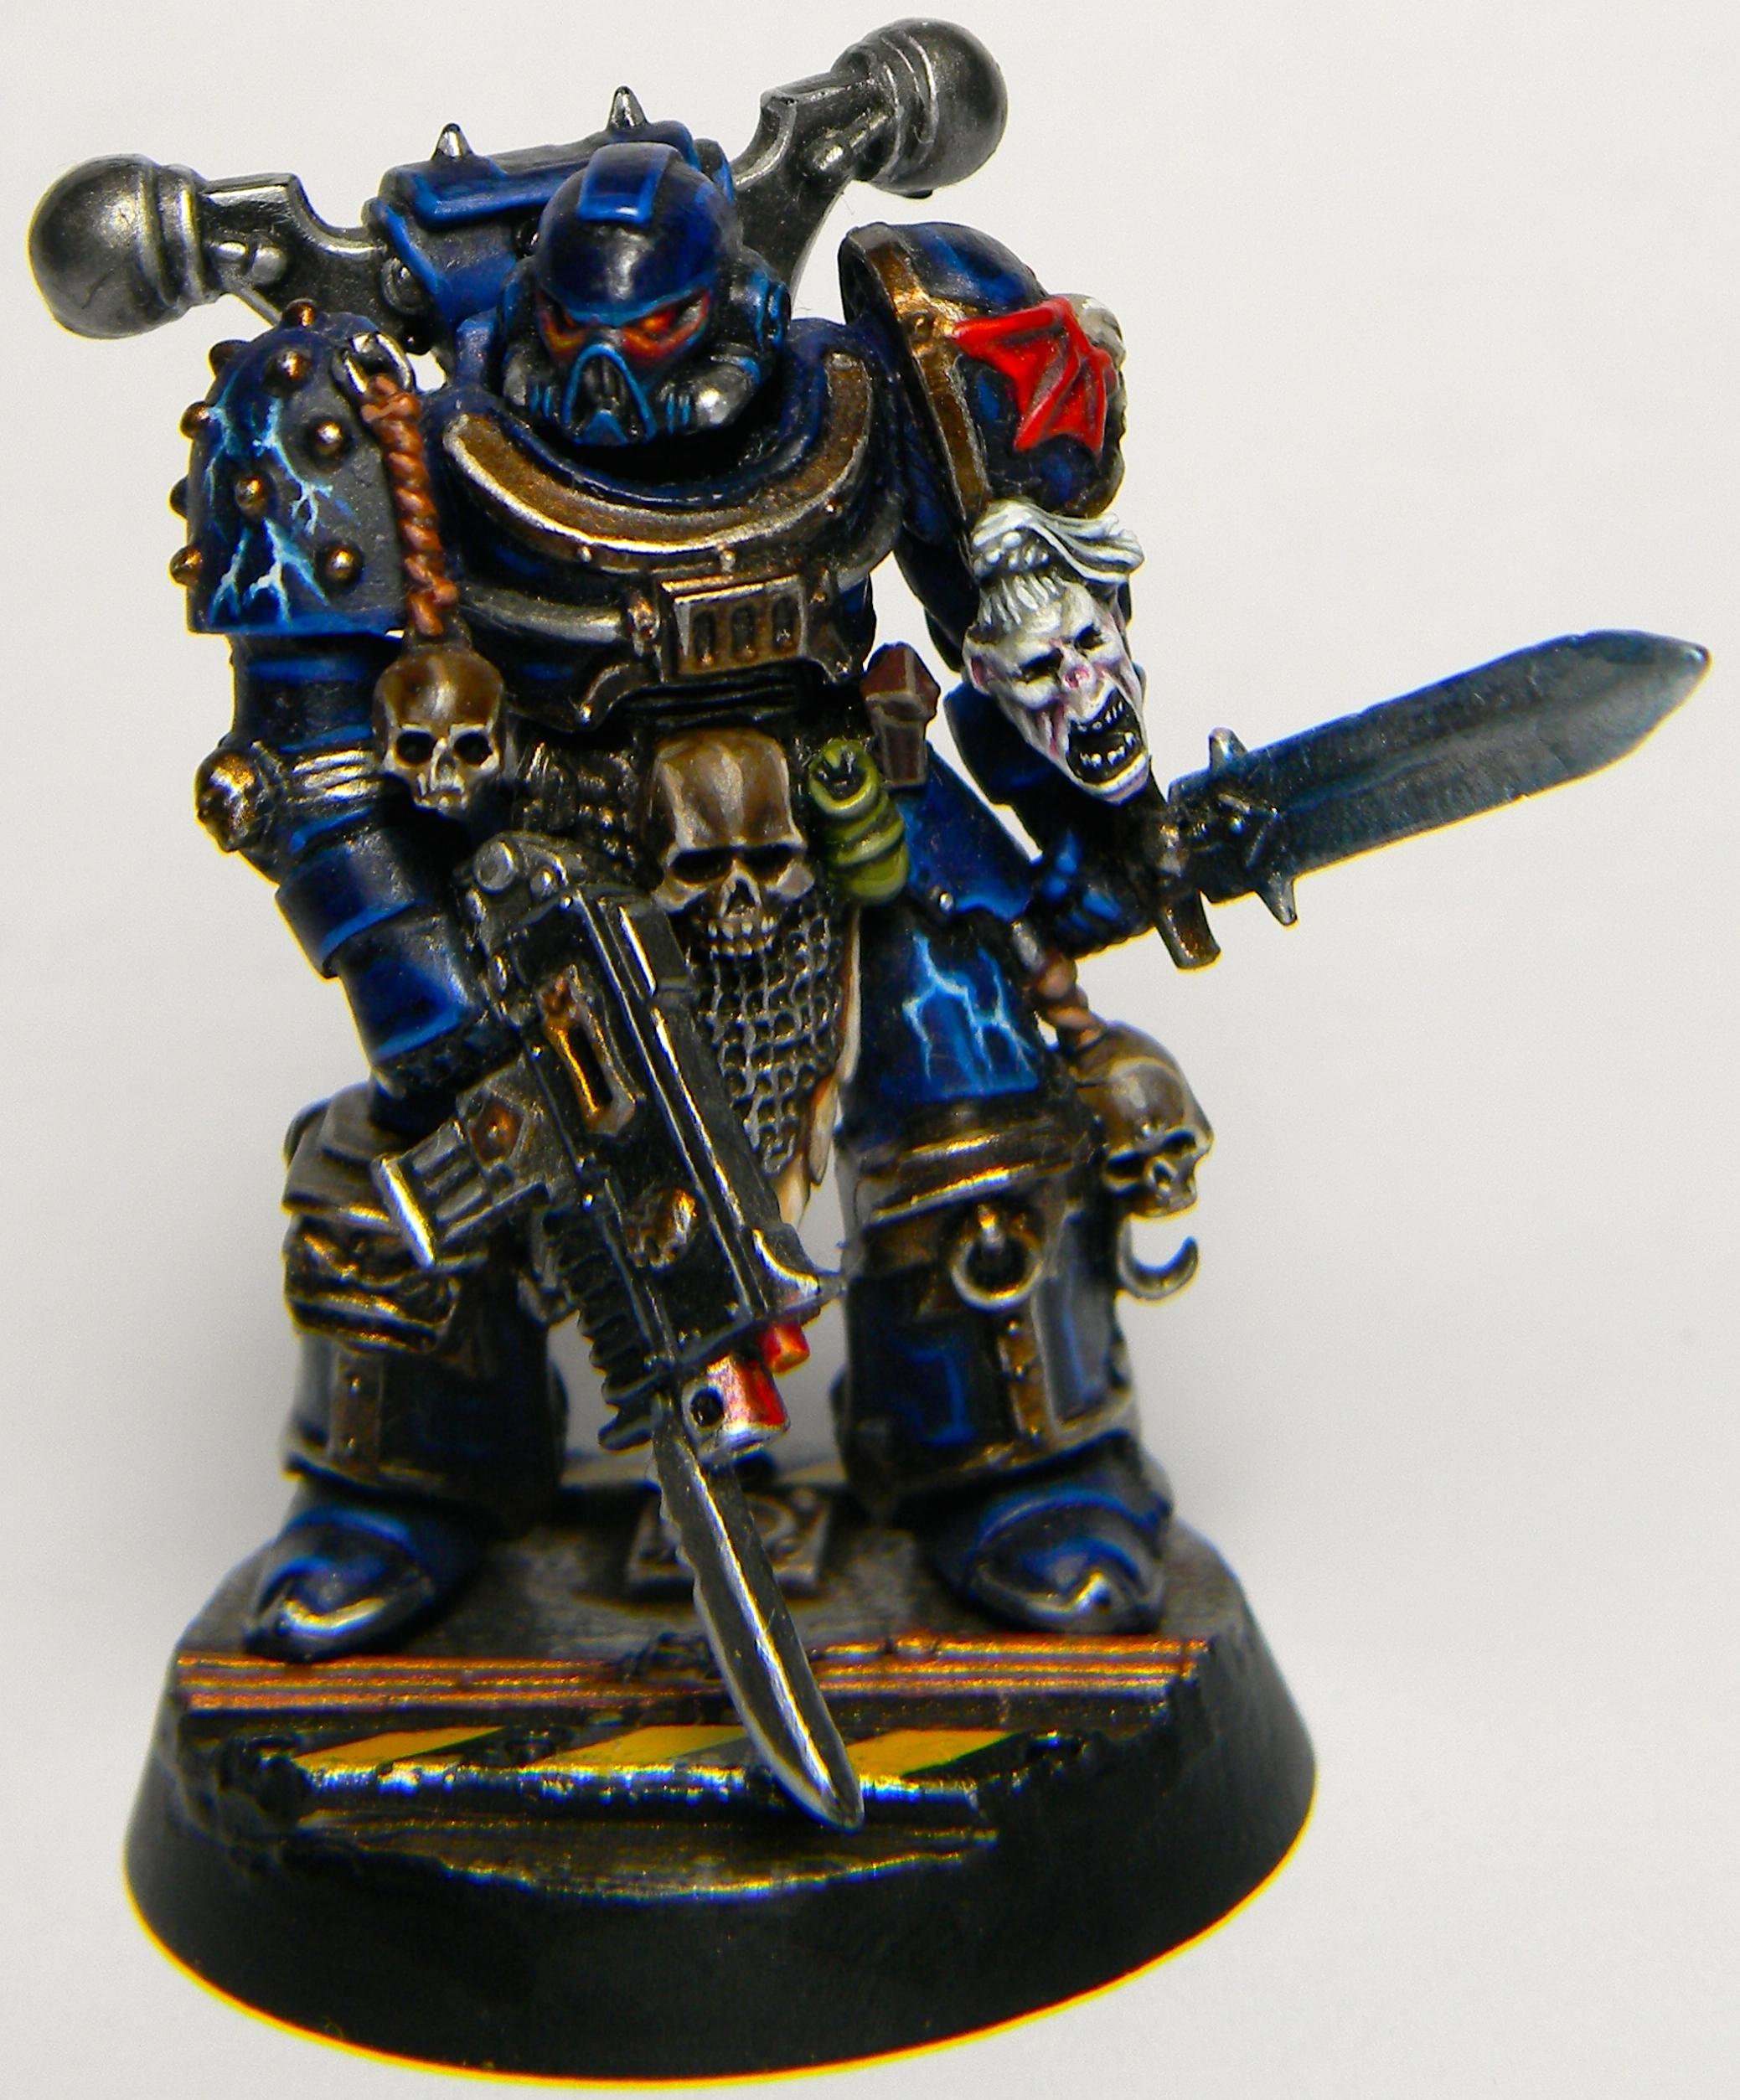 Black Library, Chaos, Conversion, Cyrion, First Claw, Night Lords, Space Marines, True Scale, Warhammer 40,000